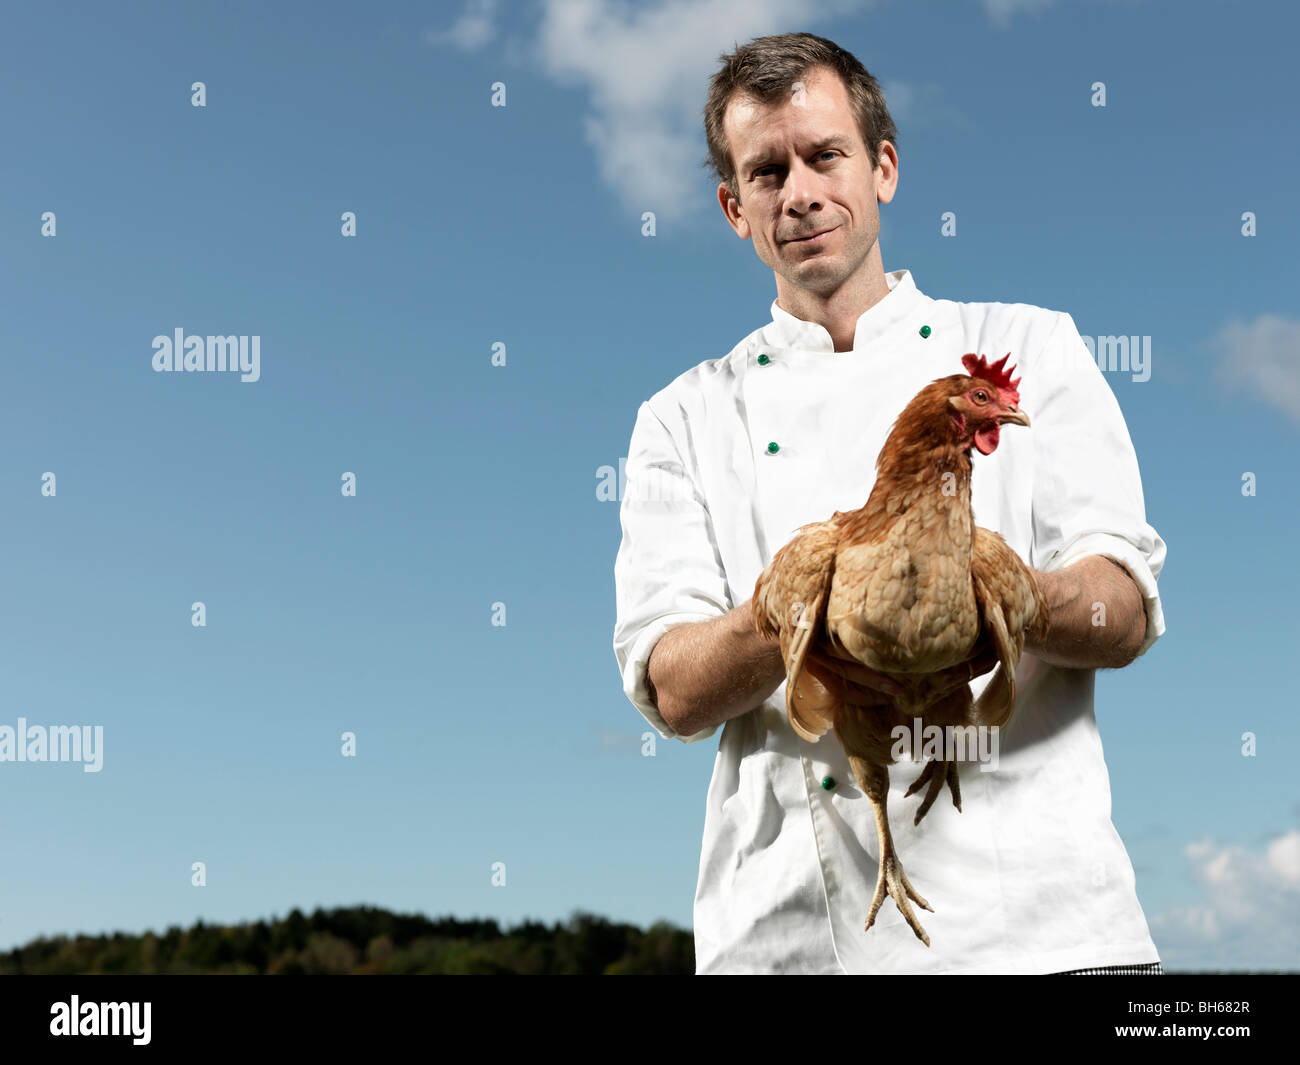 Chef holding hen Banque D'Images